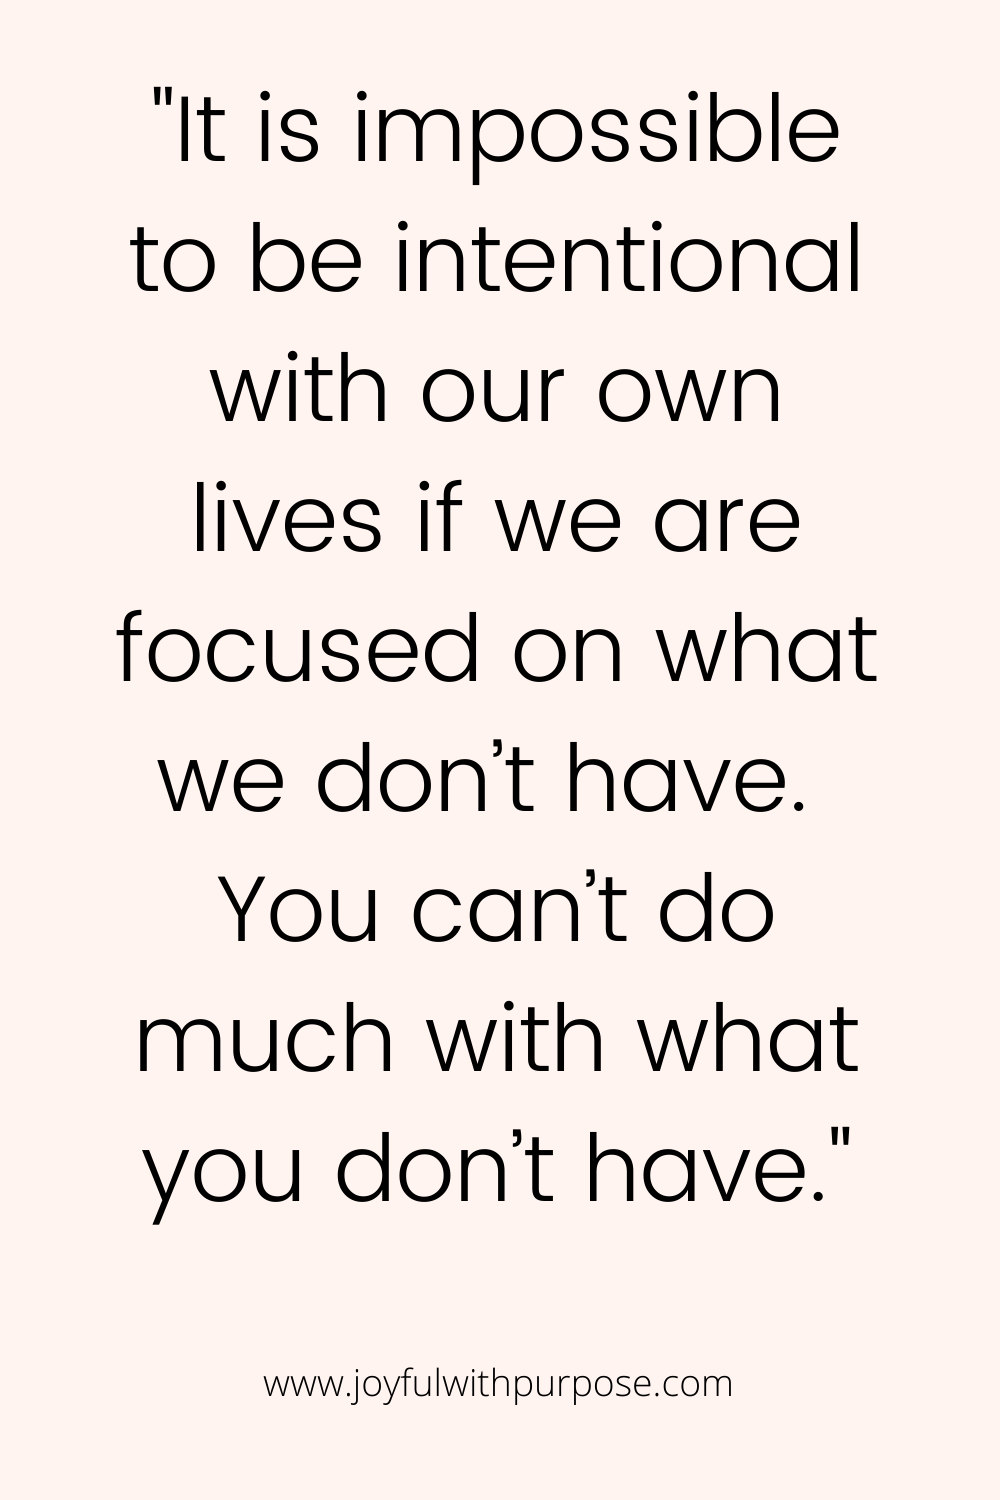 How to Live an Intentional Life